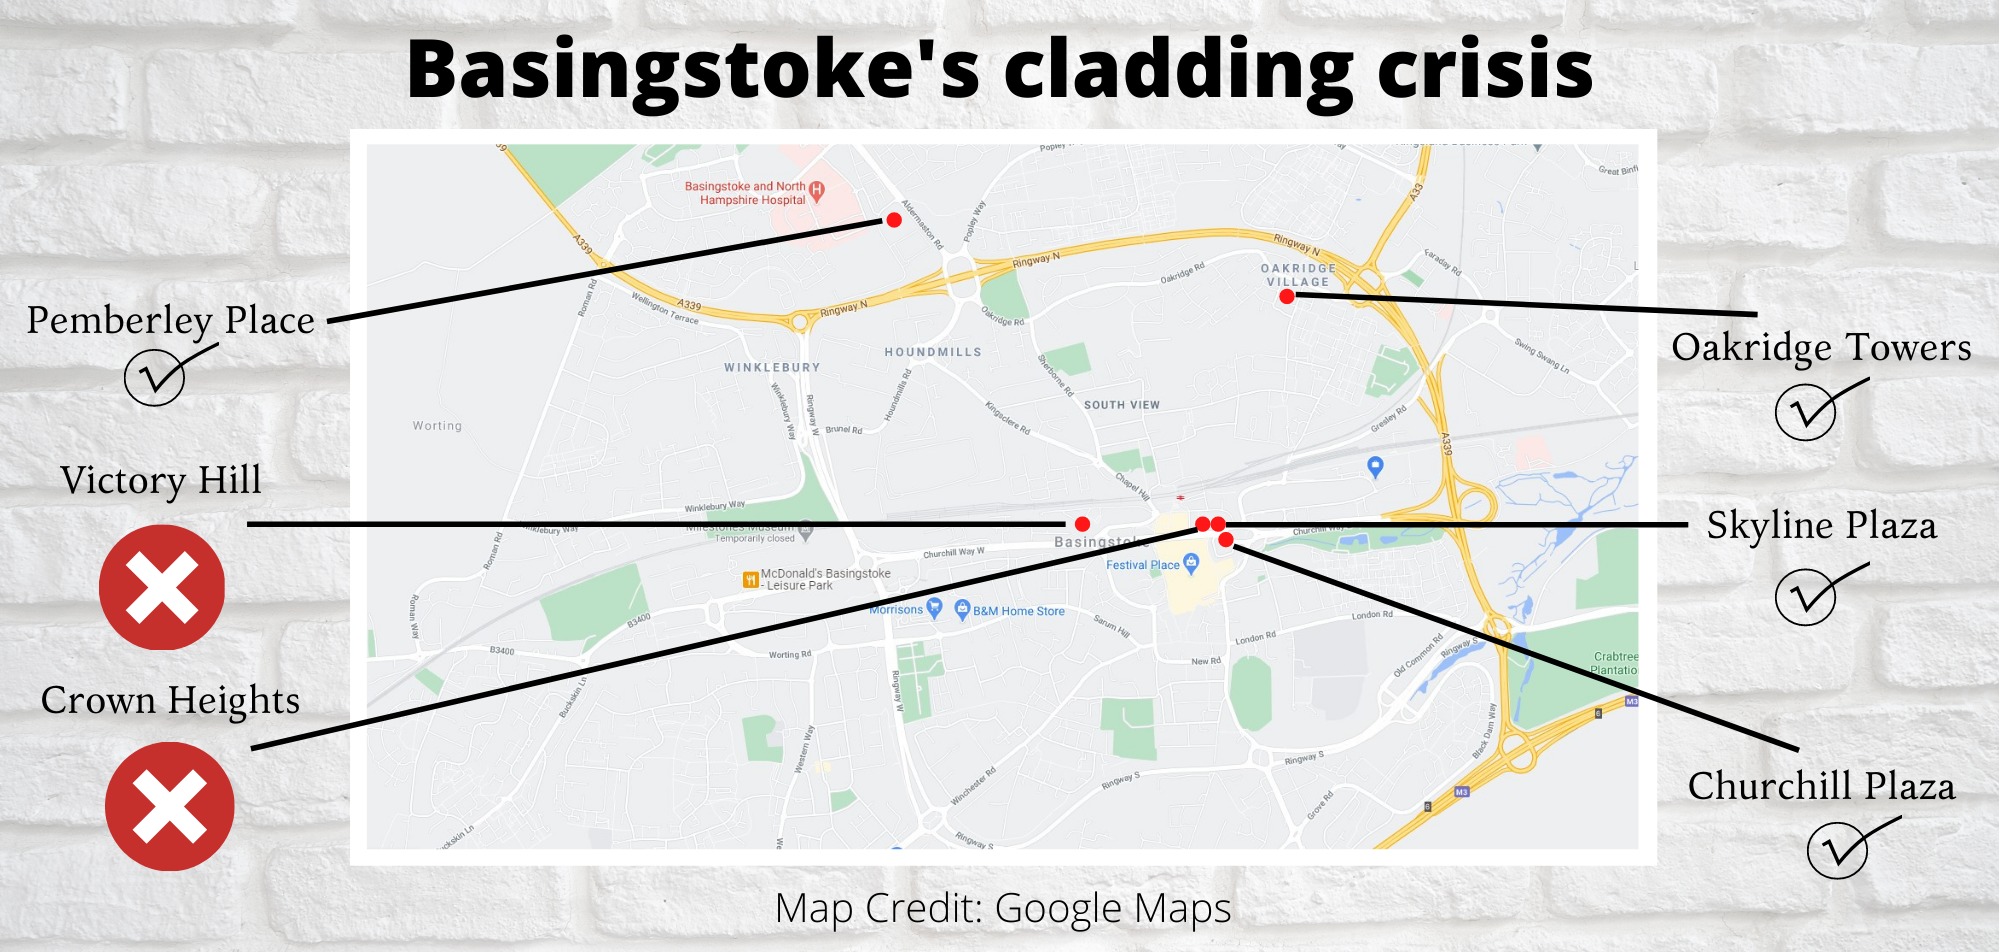 Basingstoke’s cladding crisis has been laid bare.